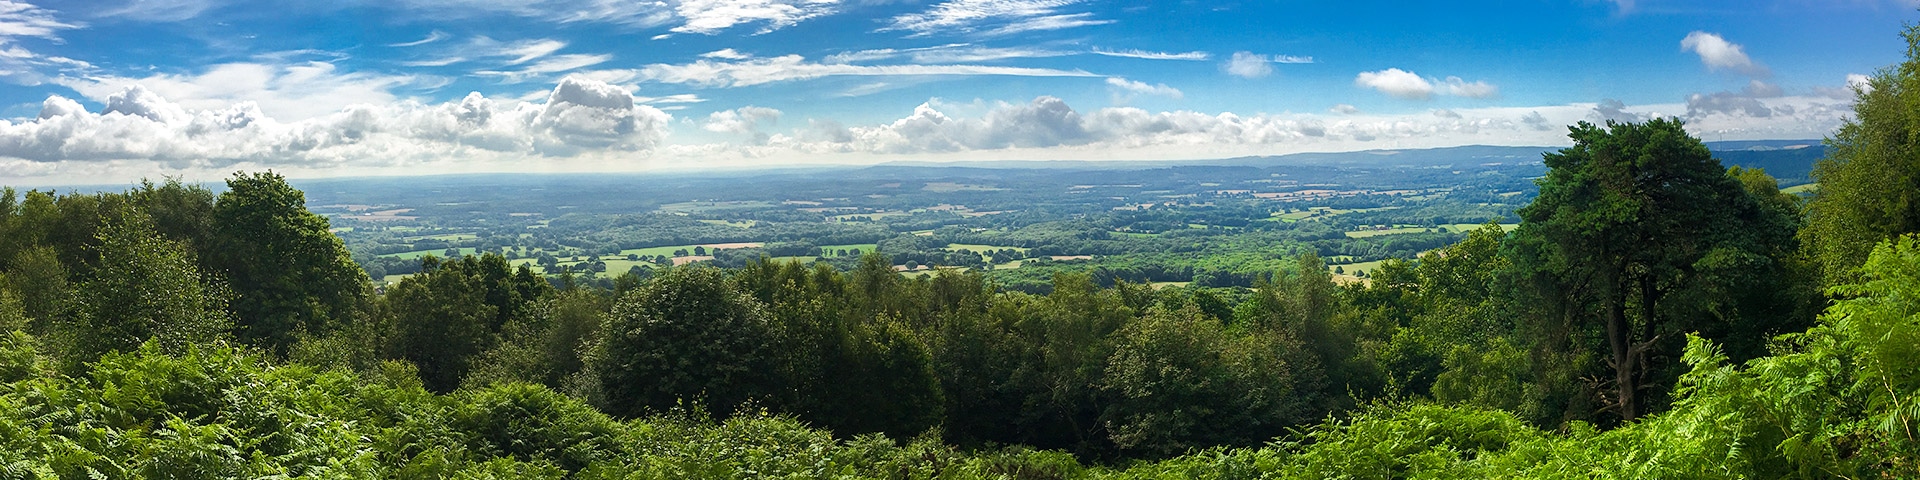 Best hikes in South Downs, England